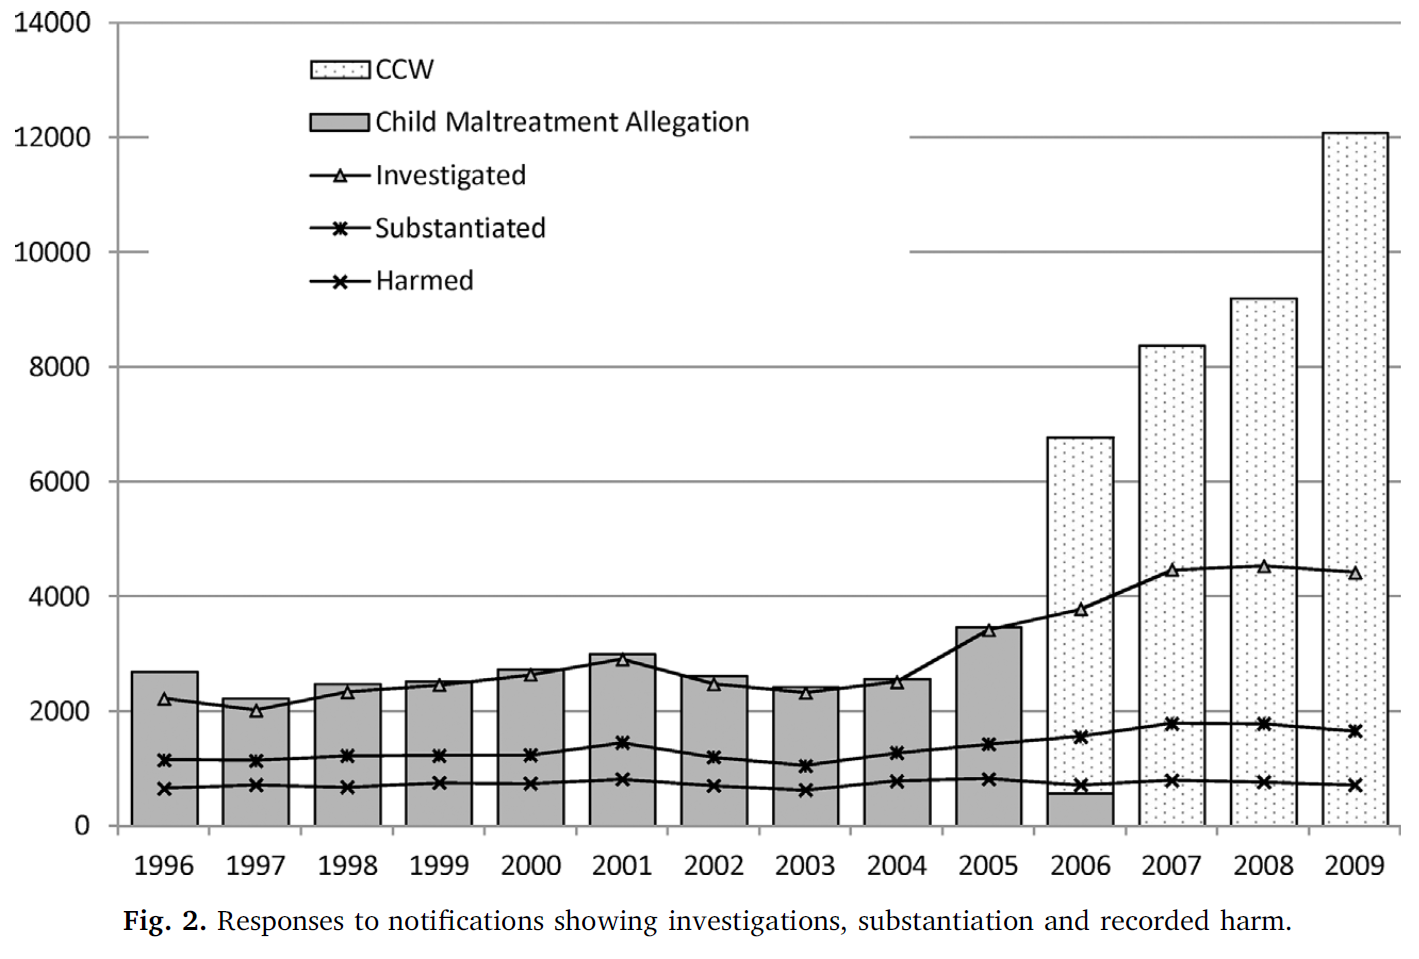 Figure 2: Annual interactions with the child protection system in Western Australia.